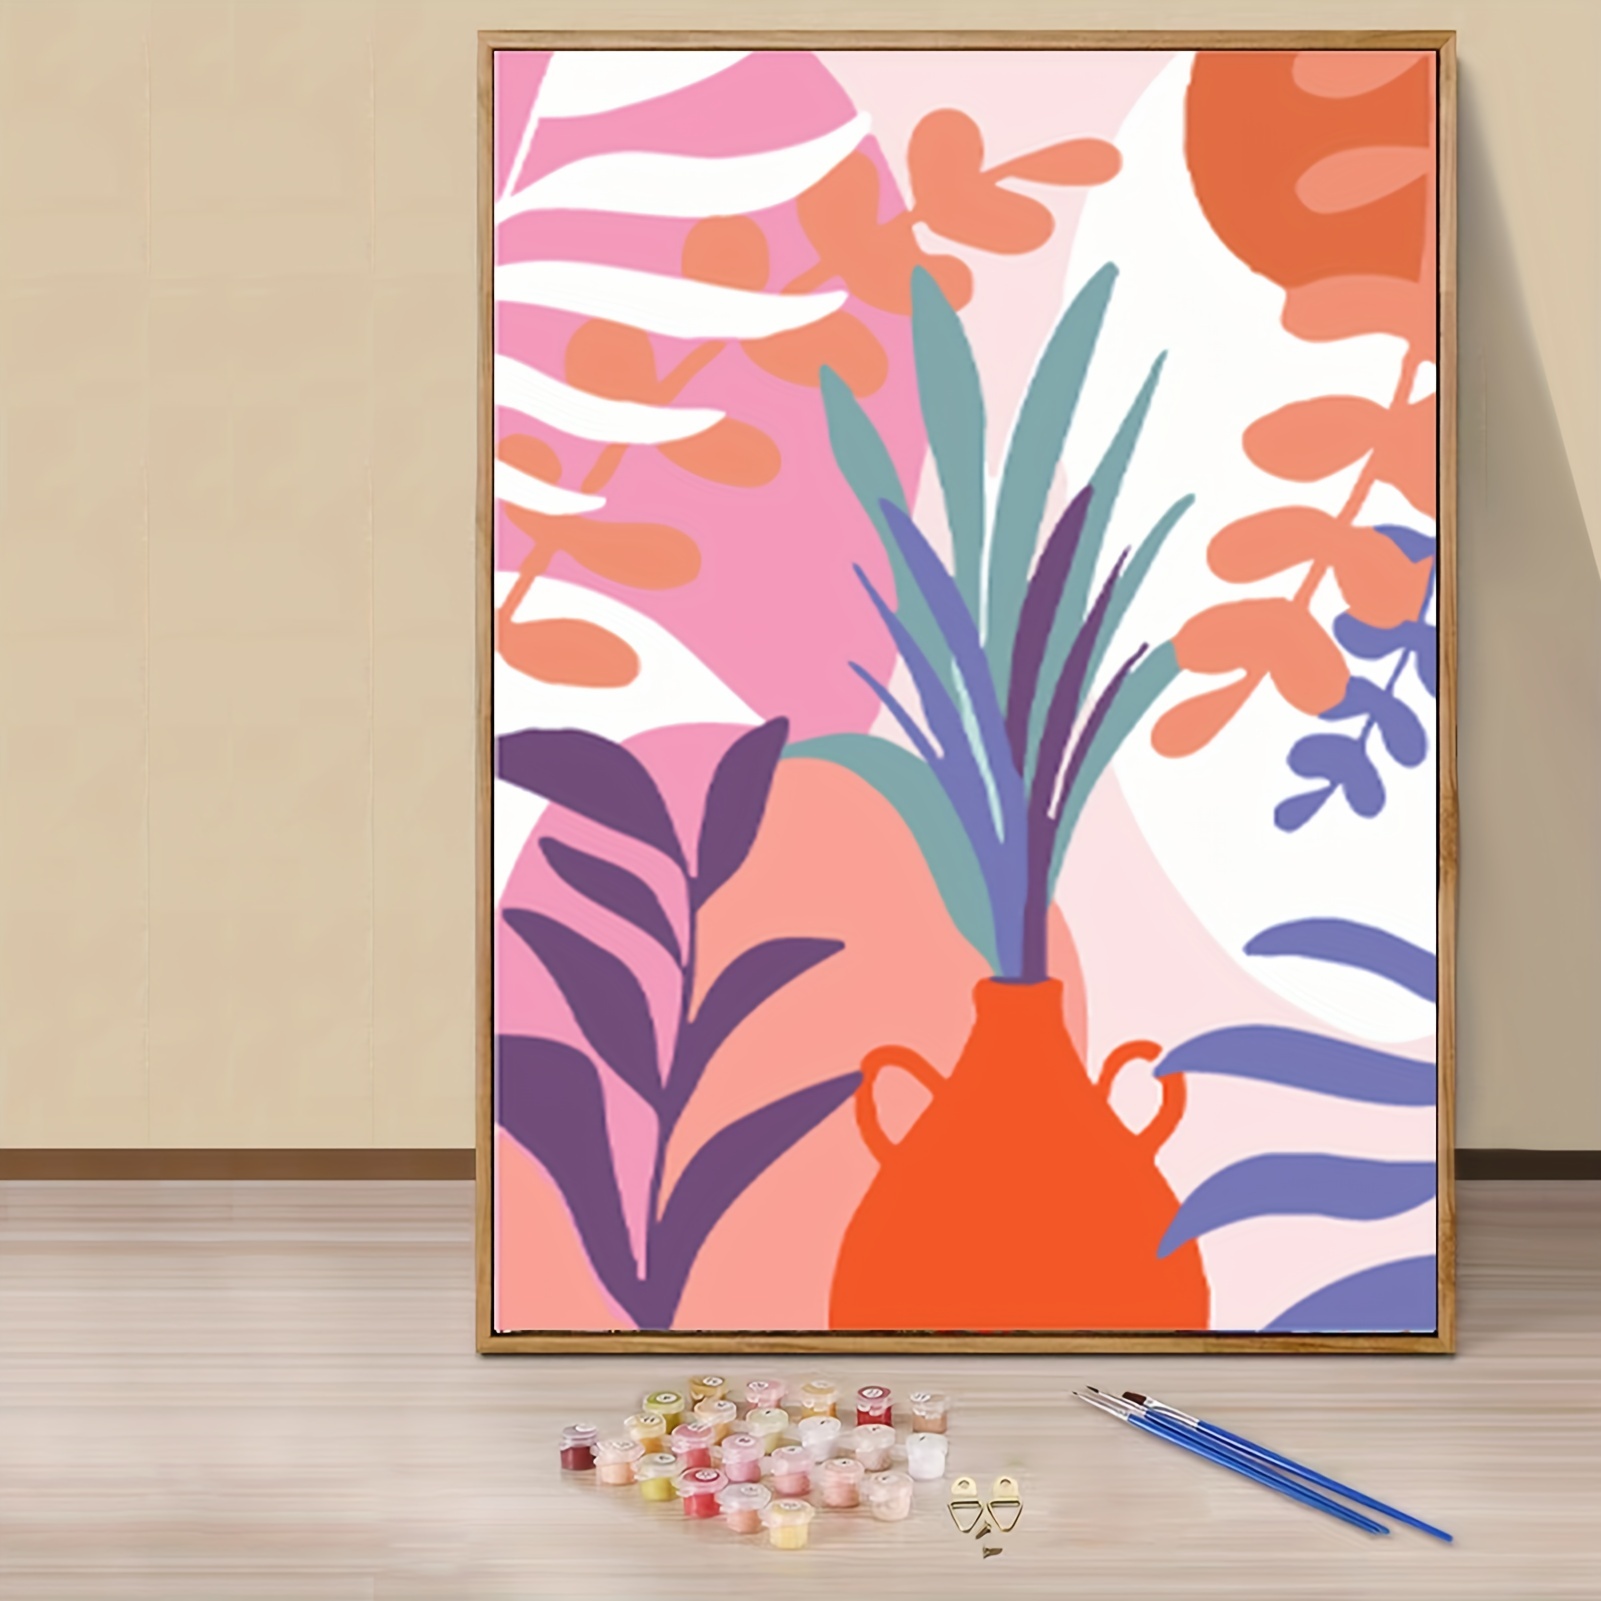 Abstract Flowers Art - Paint By Numbers - Painting By Numbers